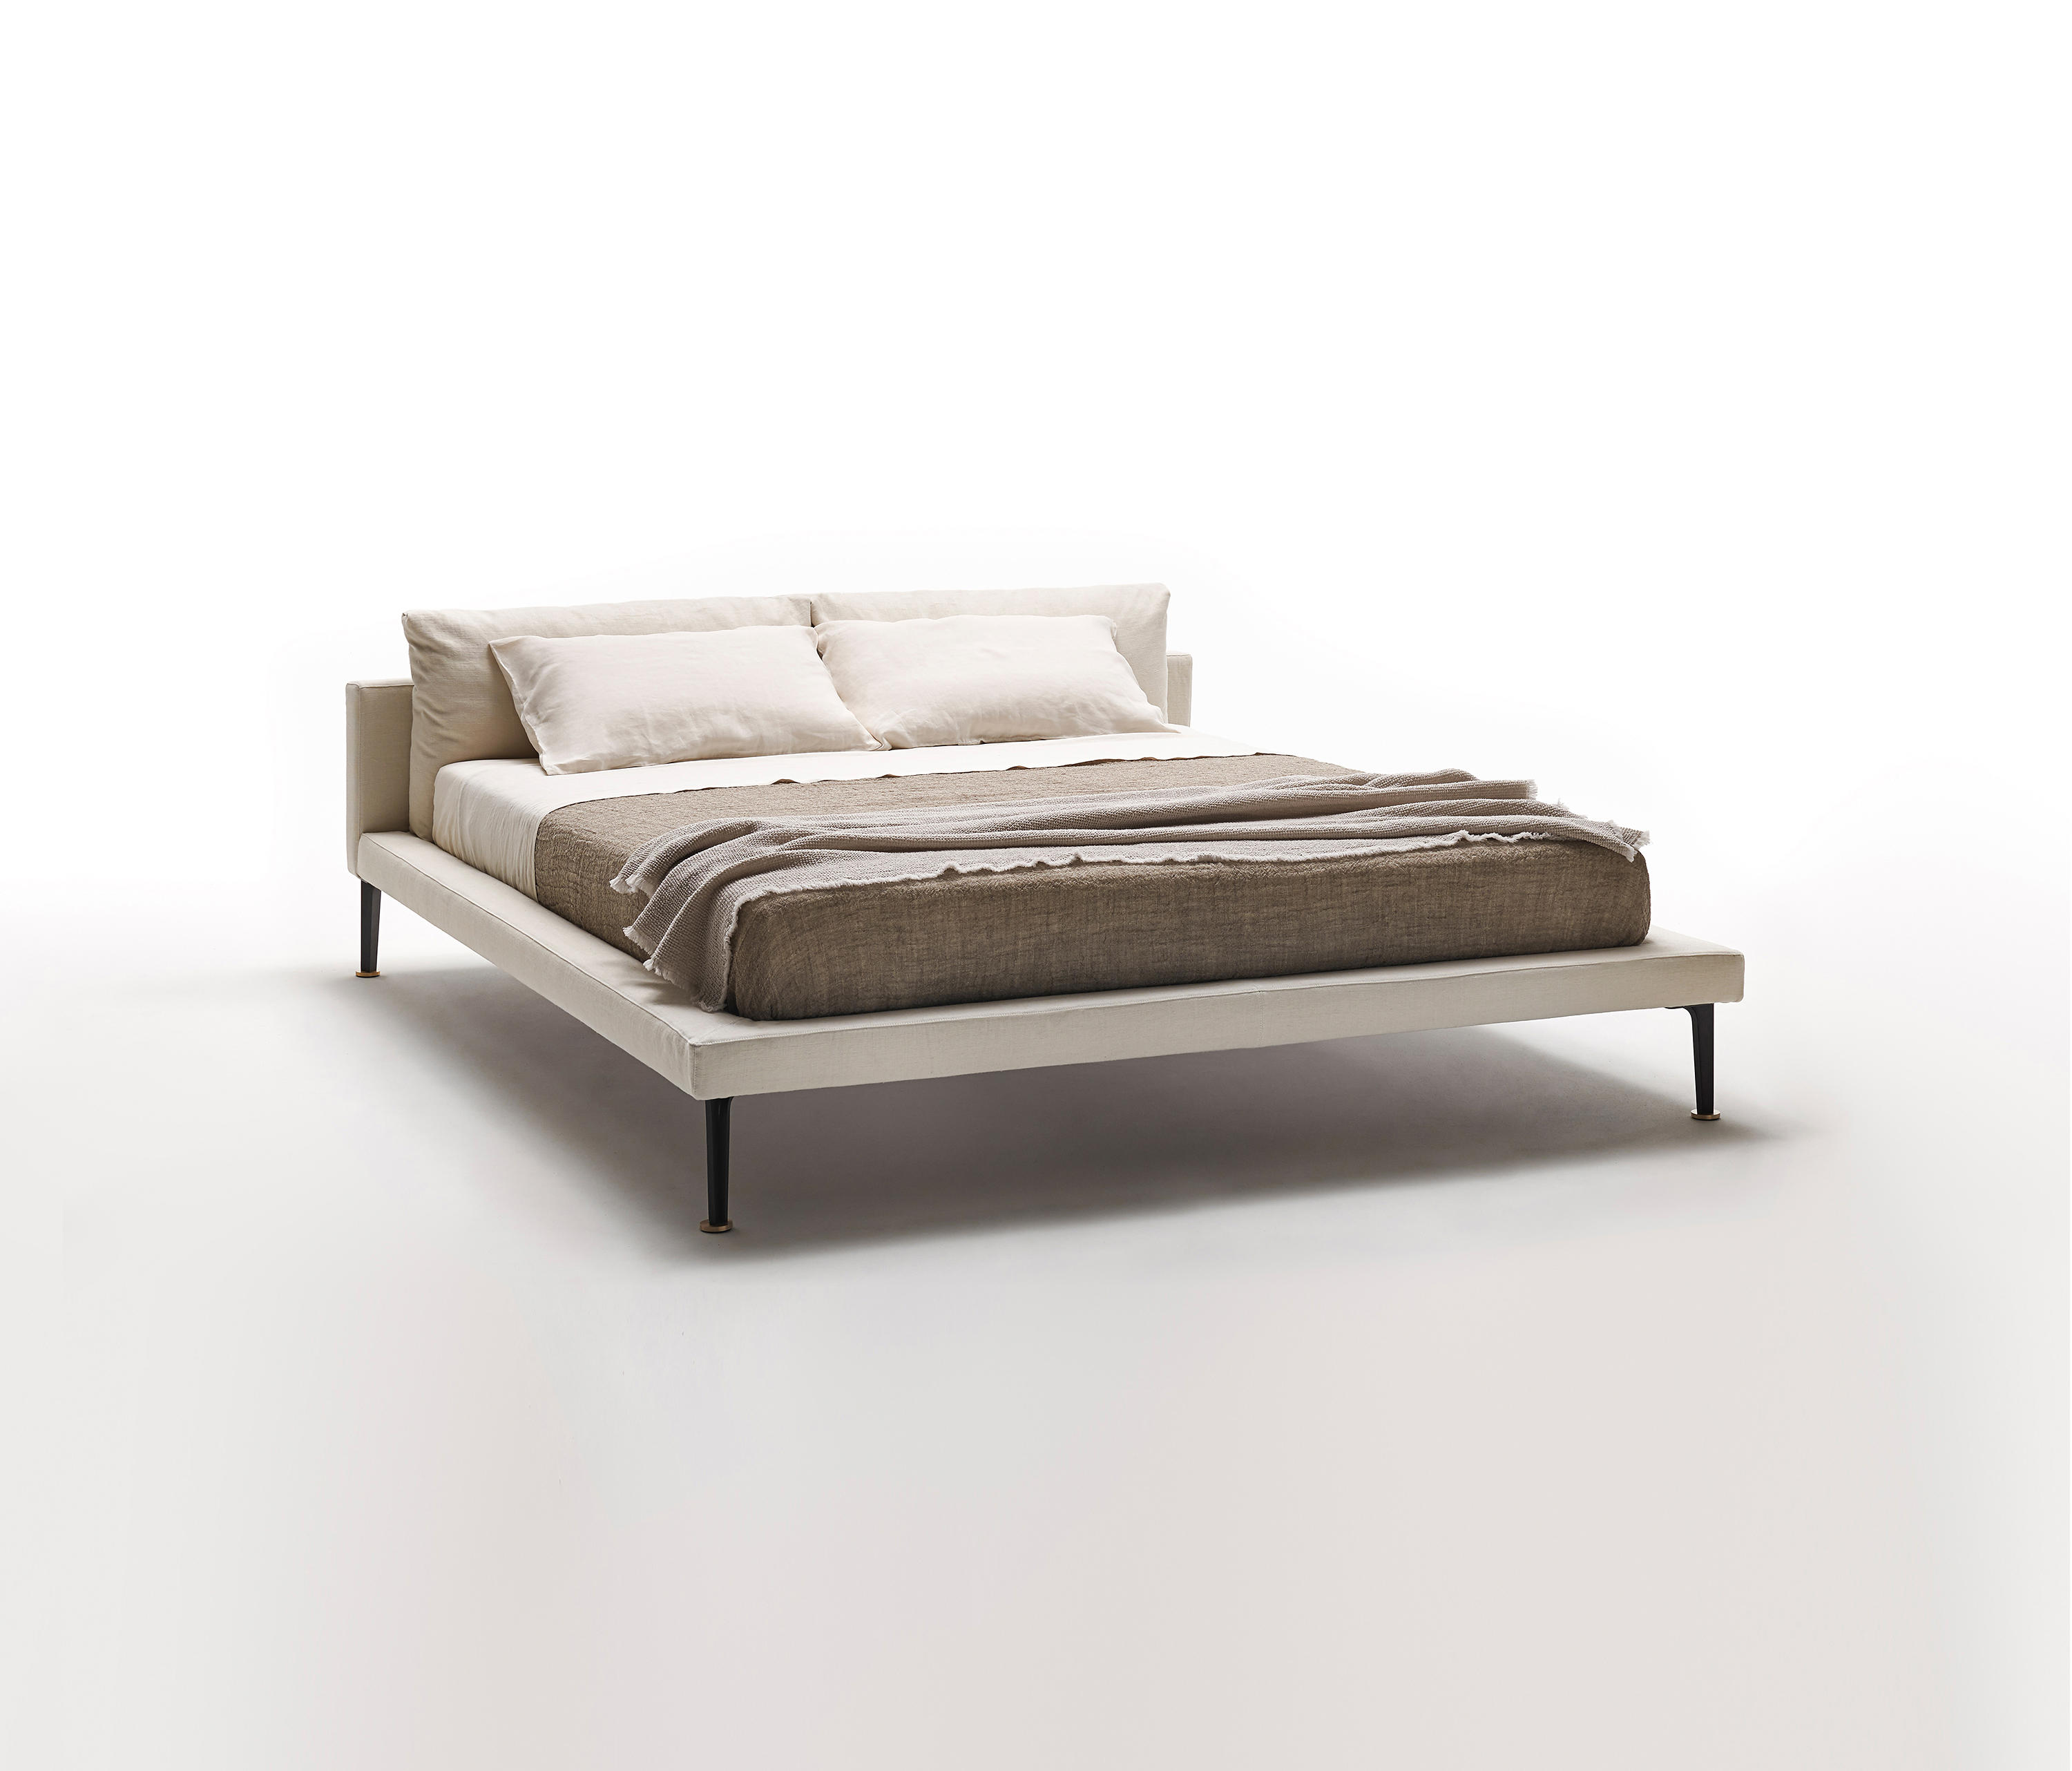 Floyd Hi Bed Beds From Living Divani Architonic